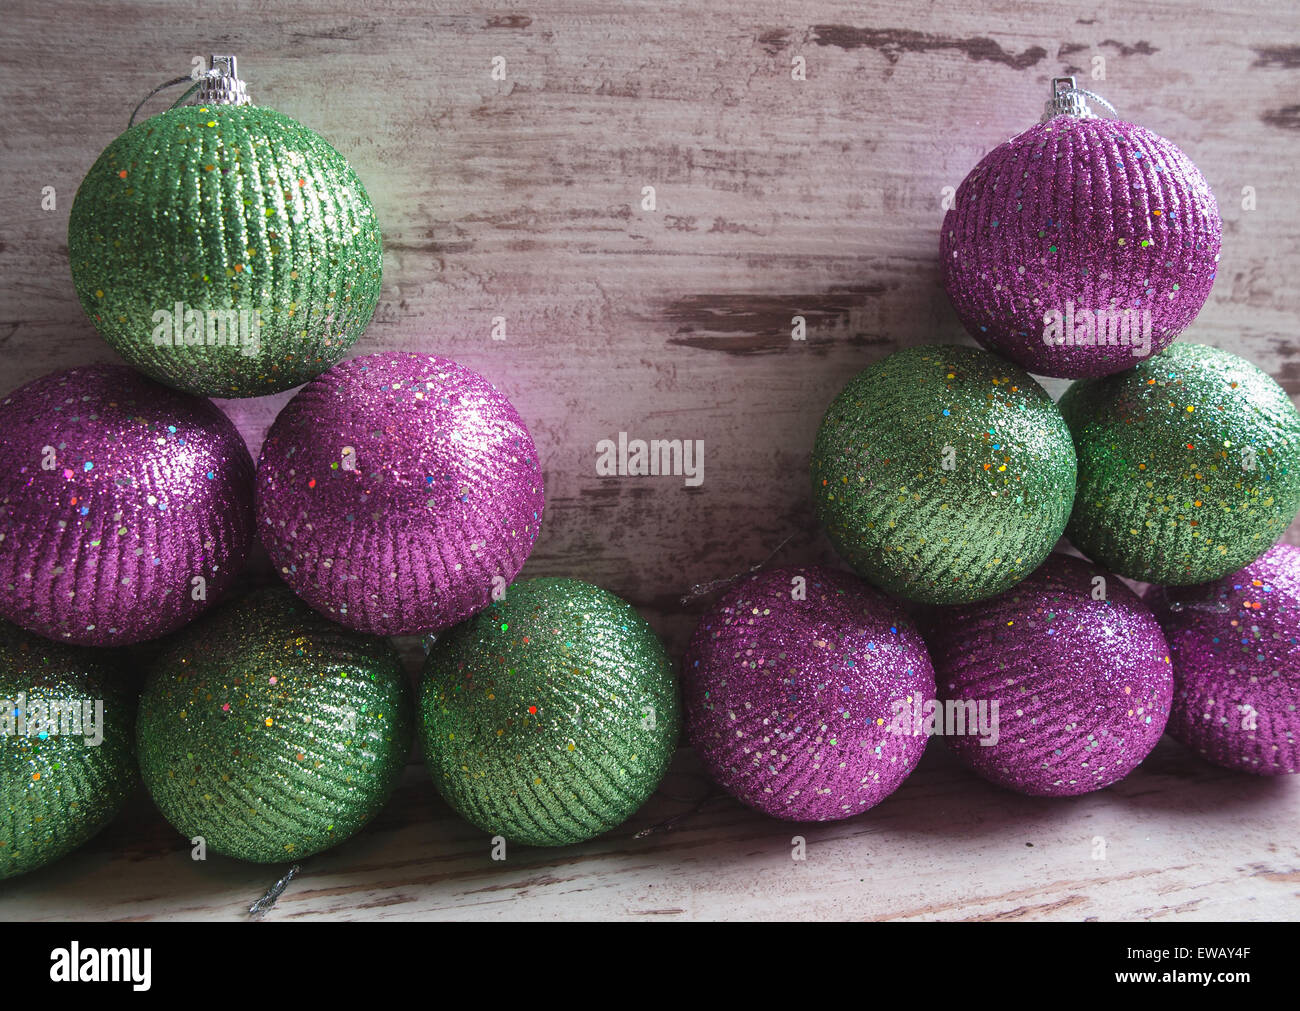 Pink and green christmas balls in a stack over wooden background in a studio shot Stock Photo